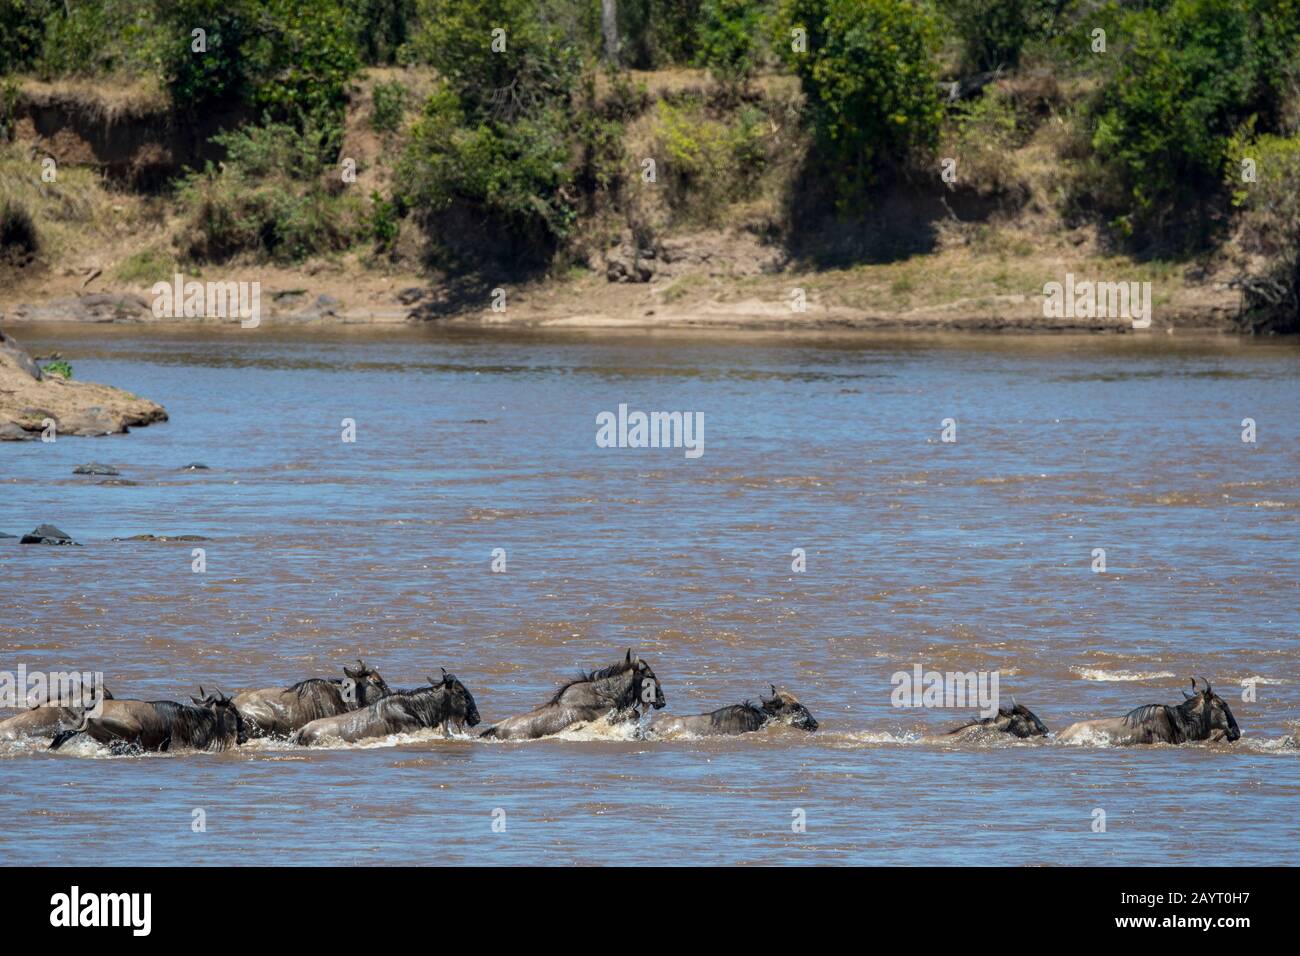 Wildebeests, also called gnus or wildebai, crossing the Mara River in the Masai Mara National Reserve in Kenya during their annual migration. Stock Photo